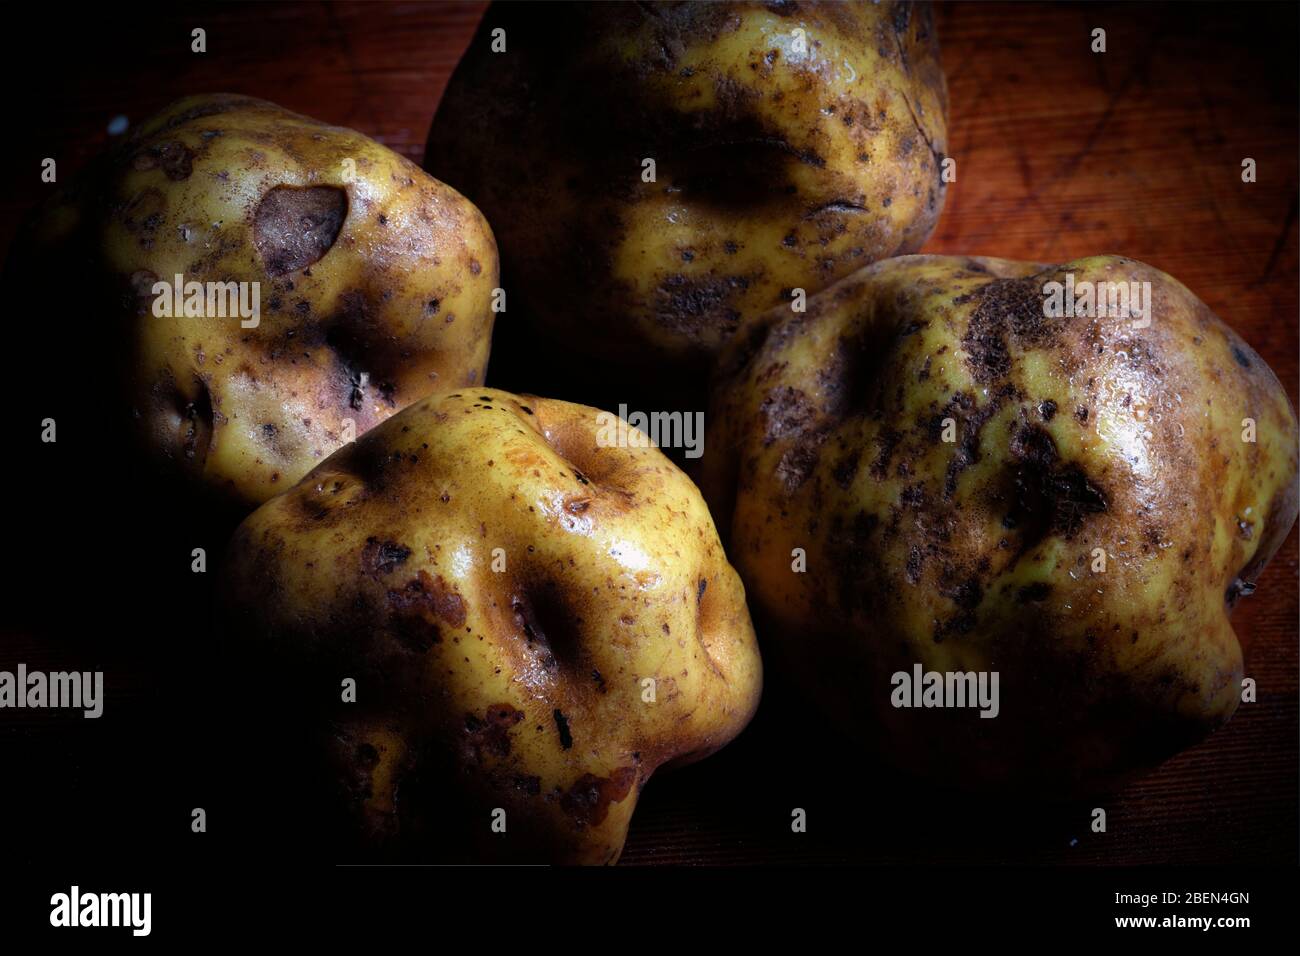 Four fresh potatoes with water drops on a wood table Stock Photo